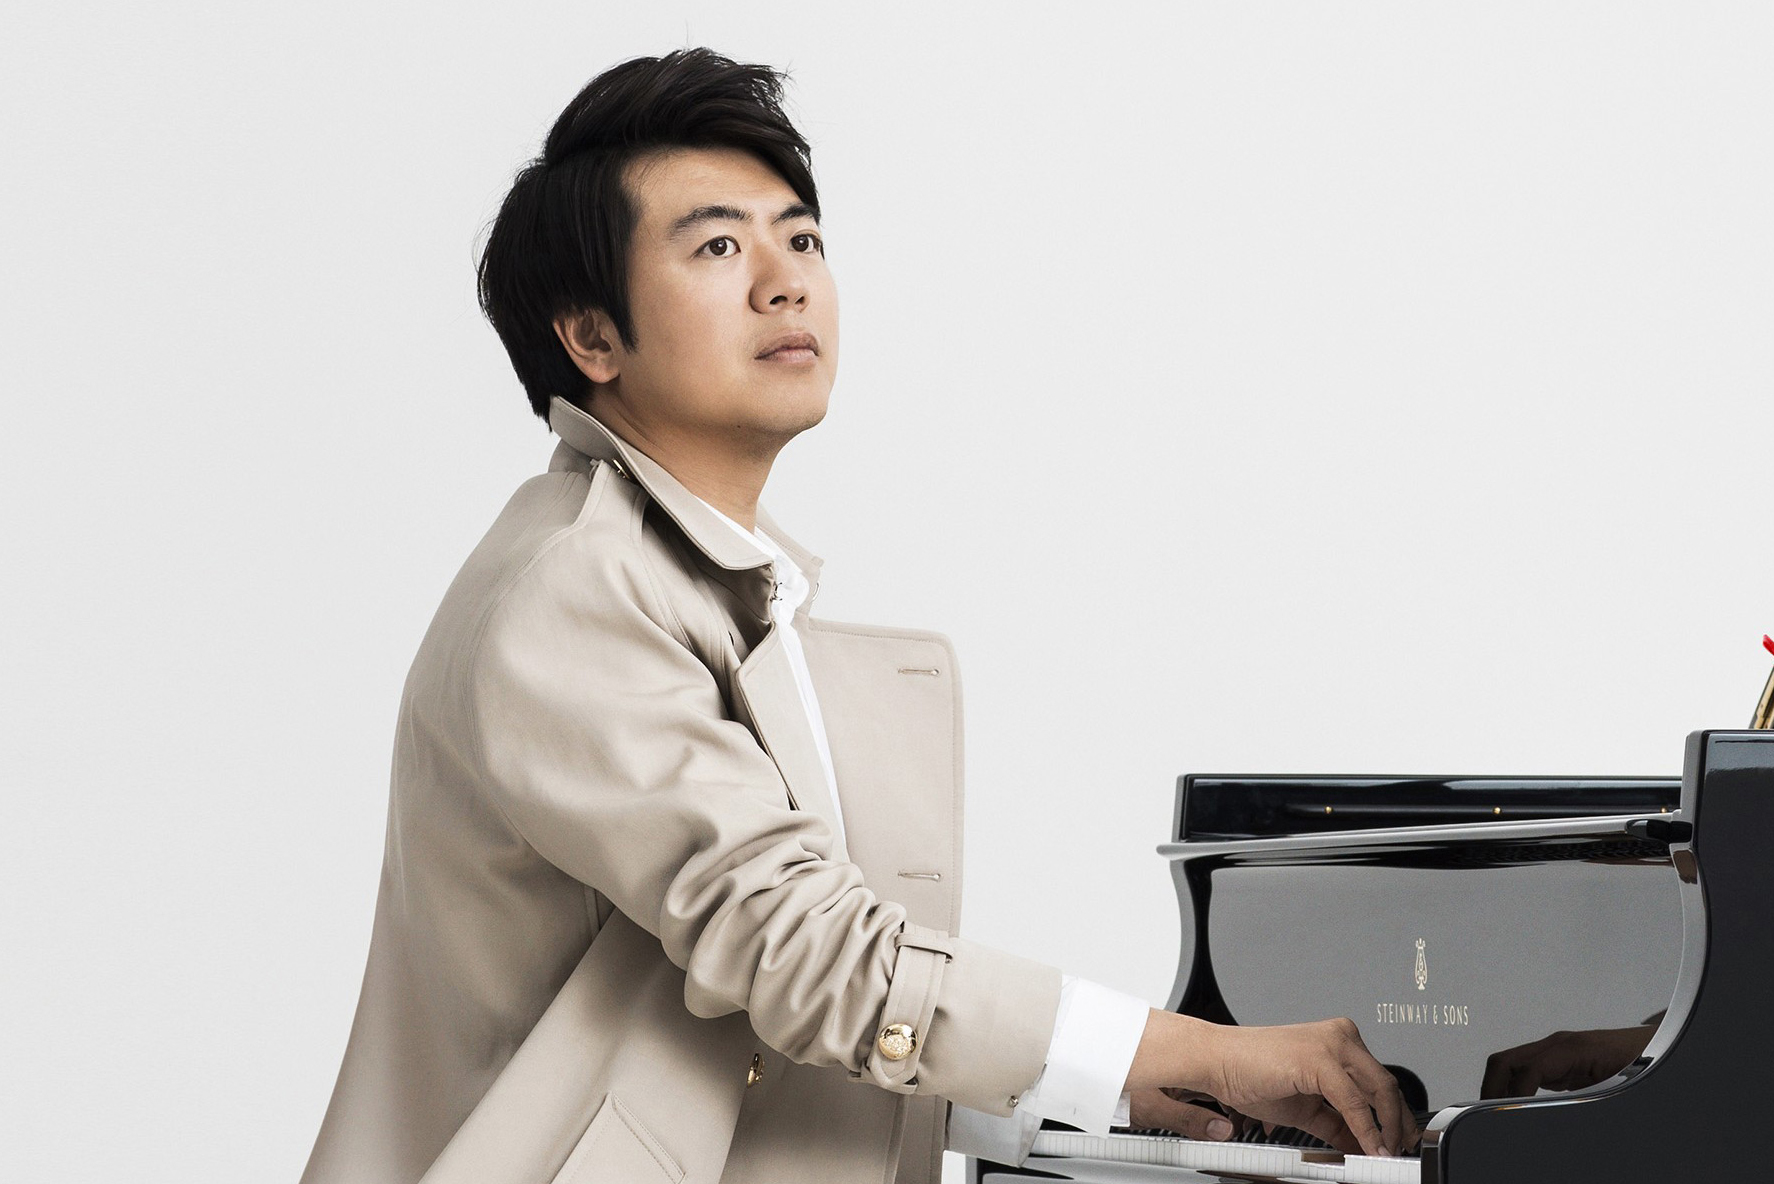 Lang Lang in a beige trenchcoat performing on a grand piano against a plain white background